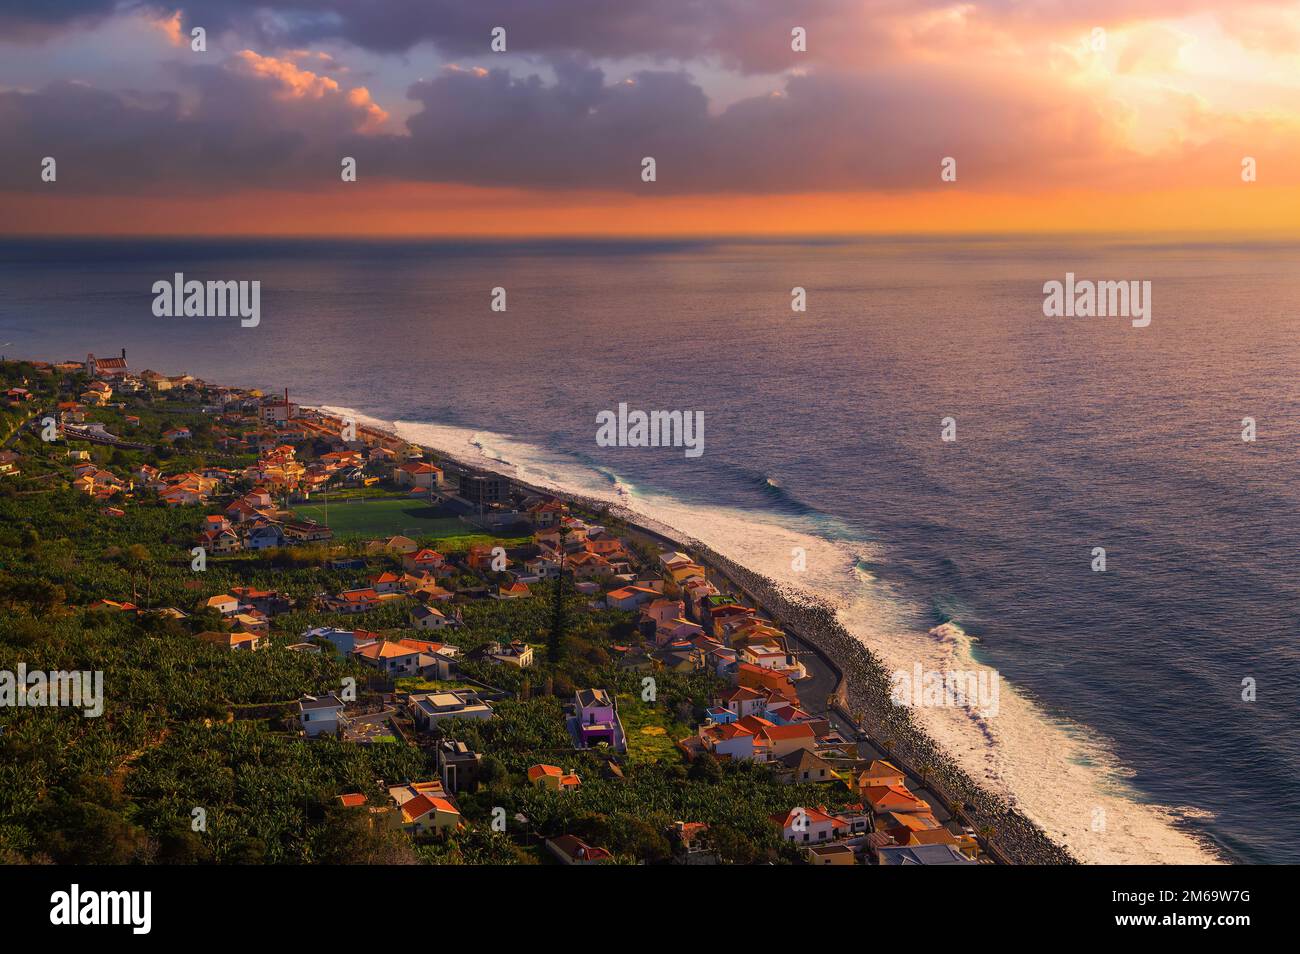 Sunset over Paul Do Mar coastal village in the Madeira Islands, Portugal Stock Photo